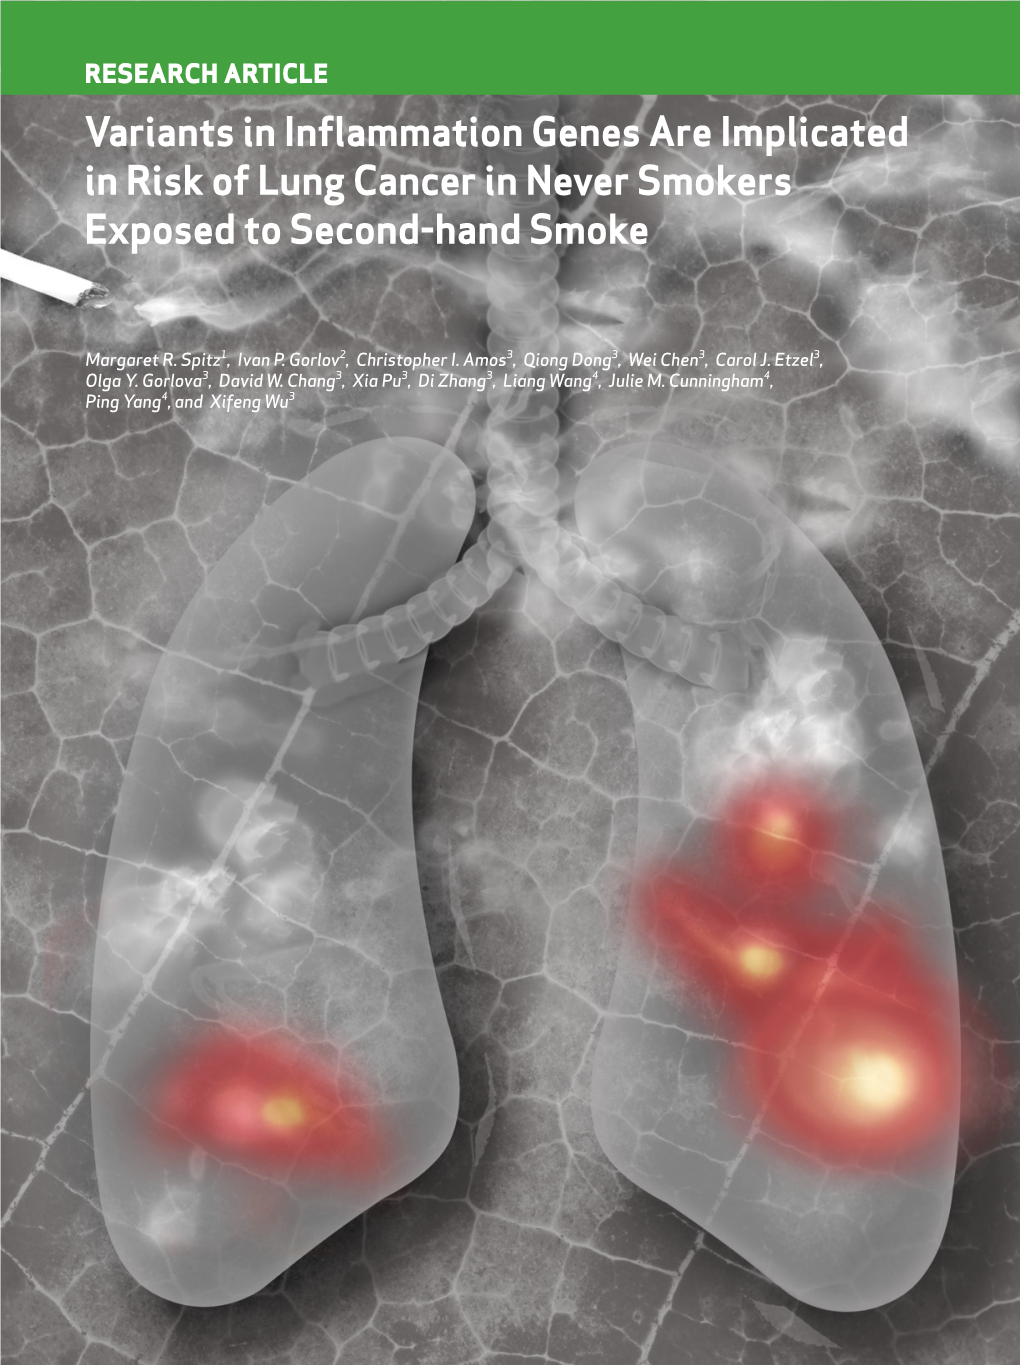 Variants in Inflammation Genes Are Implicated in Risk of Lung Cancer in Never Smokers Exposed to Second-Hand Smoke